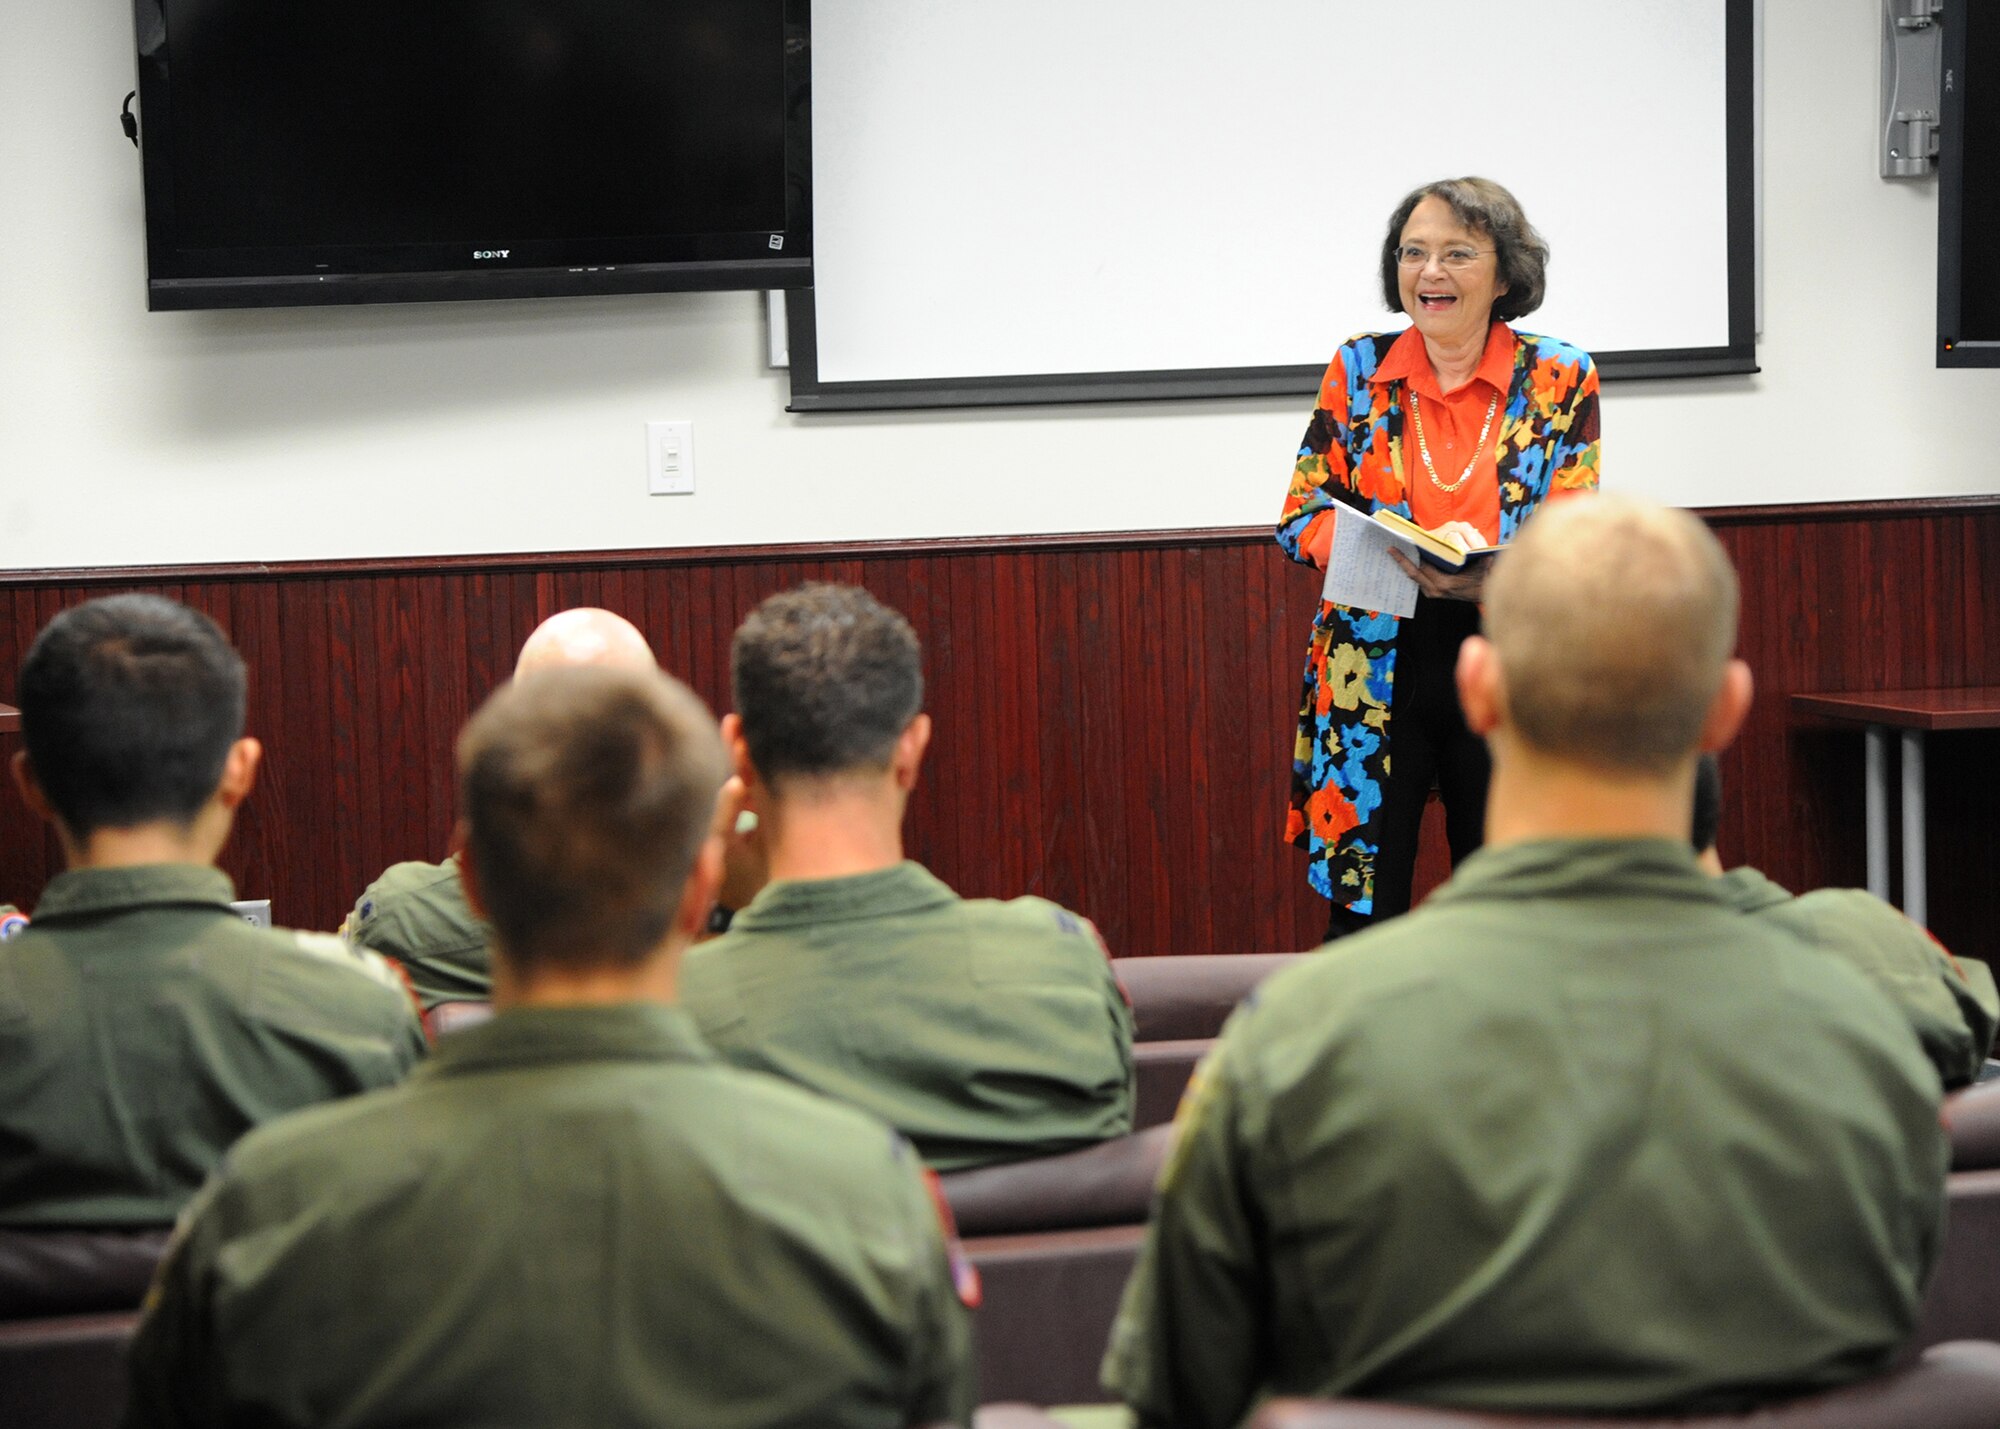 Cynthia Chennault, University of Florida-Gainesville professor of Chinese, speaks during the 435th Fighter Training Squadron library dedication Aug. 28, 2015 at Joint Base San Antonio-Randolph. The library is dedicated in honor of her father, Lt. Gen. Claire Chennault, commander of the famed first American volunteer group in China during the early years of World War II, better known as the Flying Tigers.  (U.S. Air Force photo by Melissa Peterson/released)